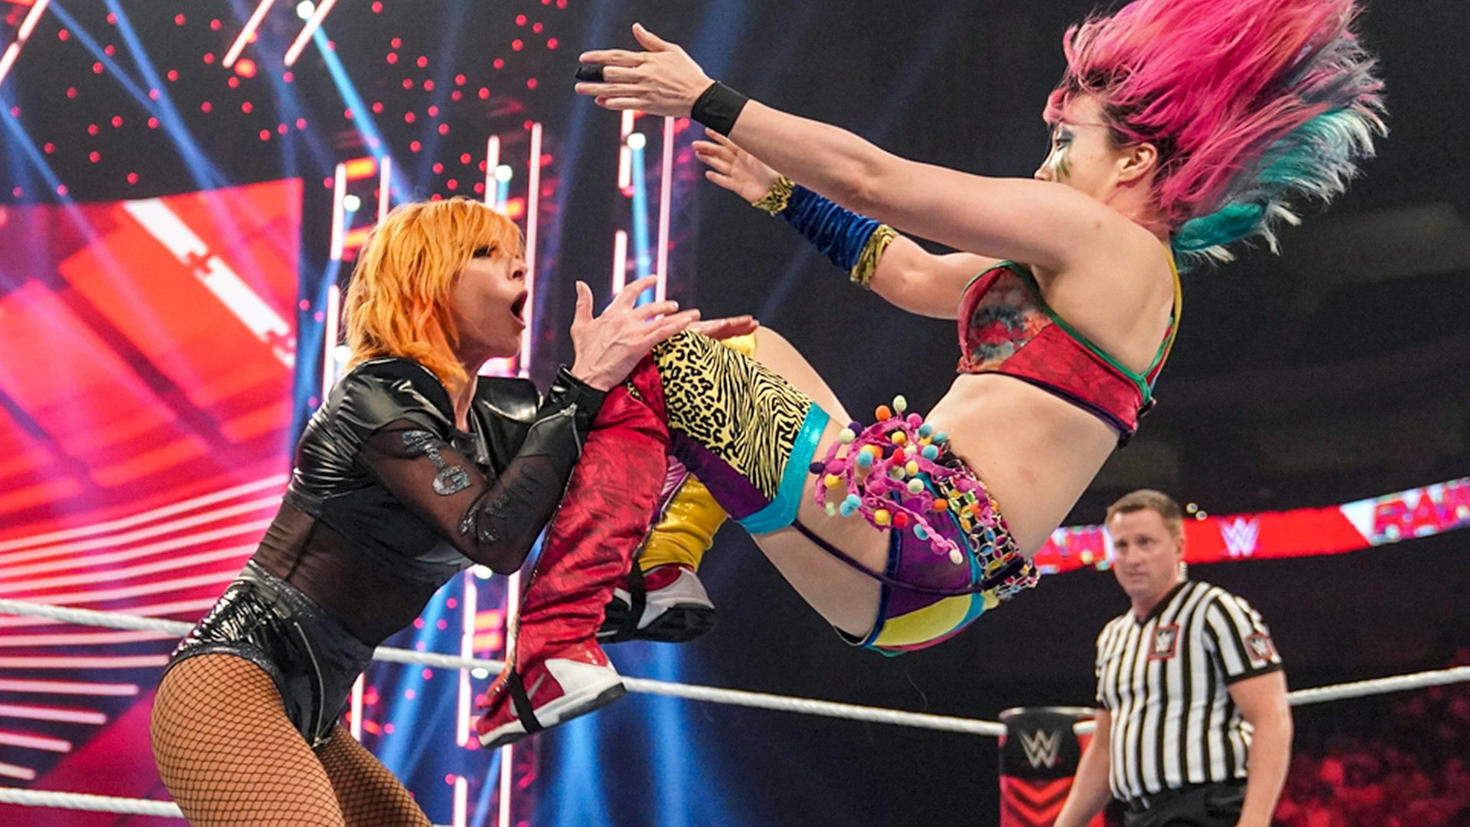 Asuka takes on Becky Lynch on Raw.